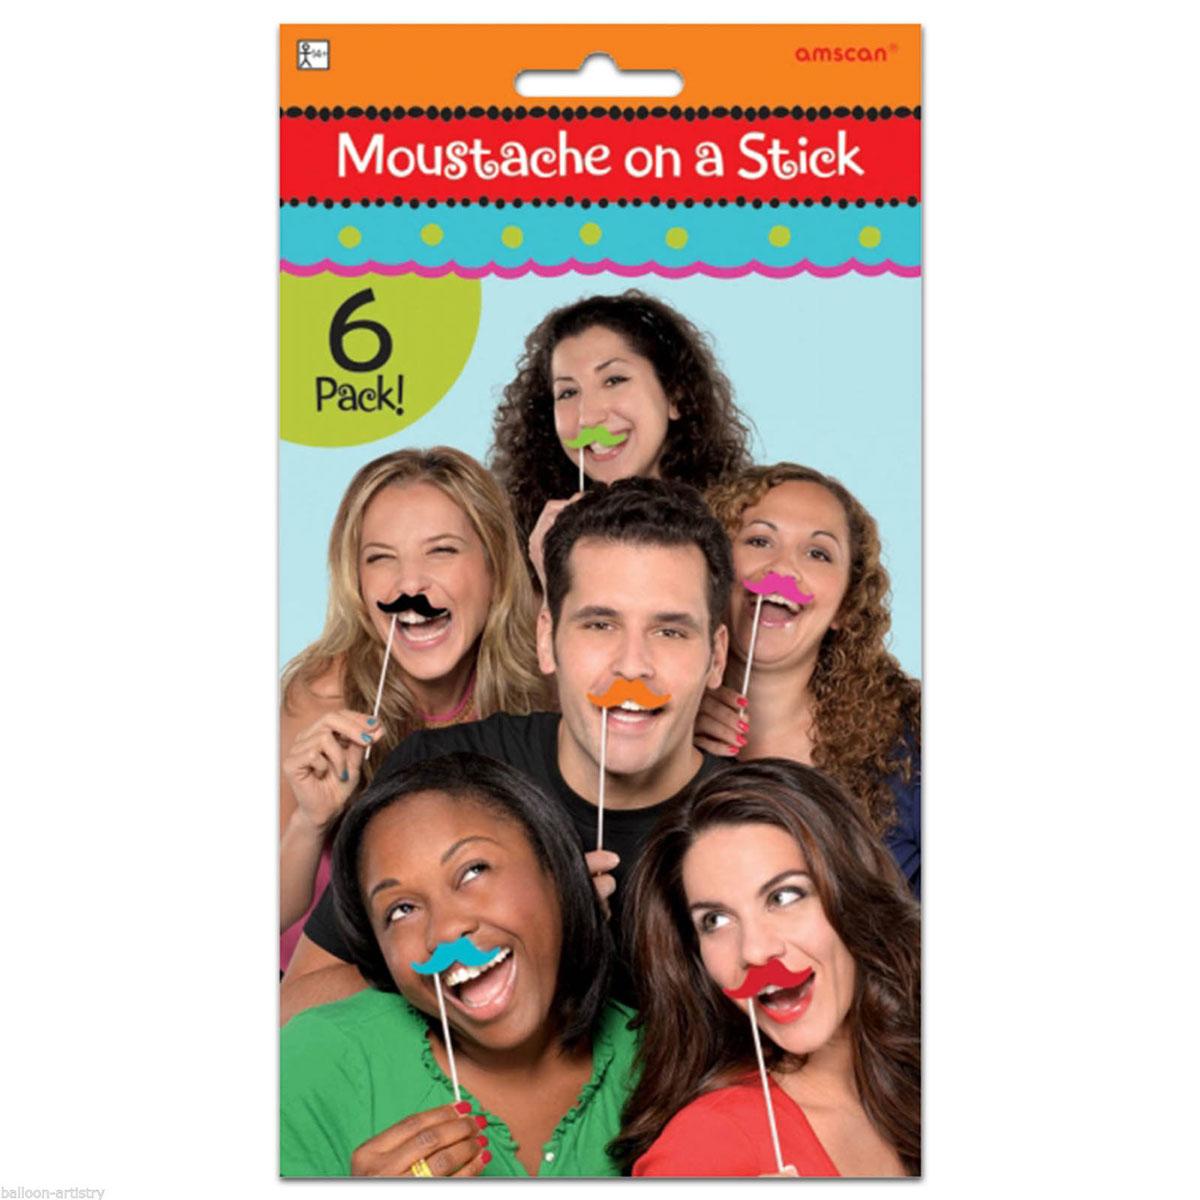 Fiesta Moustache on a Stick - pk6 by Amscan 391408 available here at Karnival Costumes online party shop